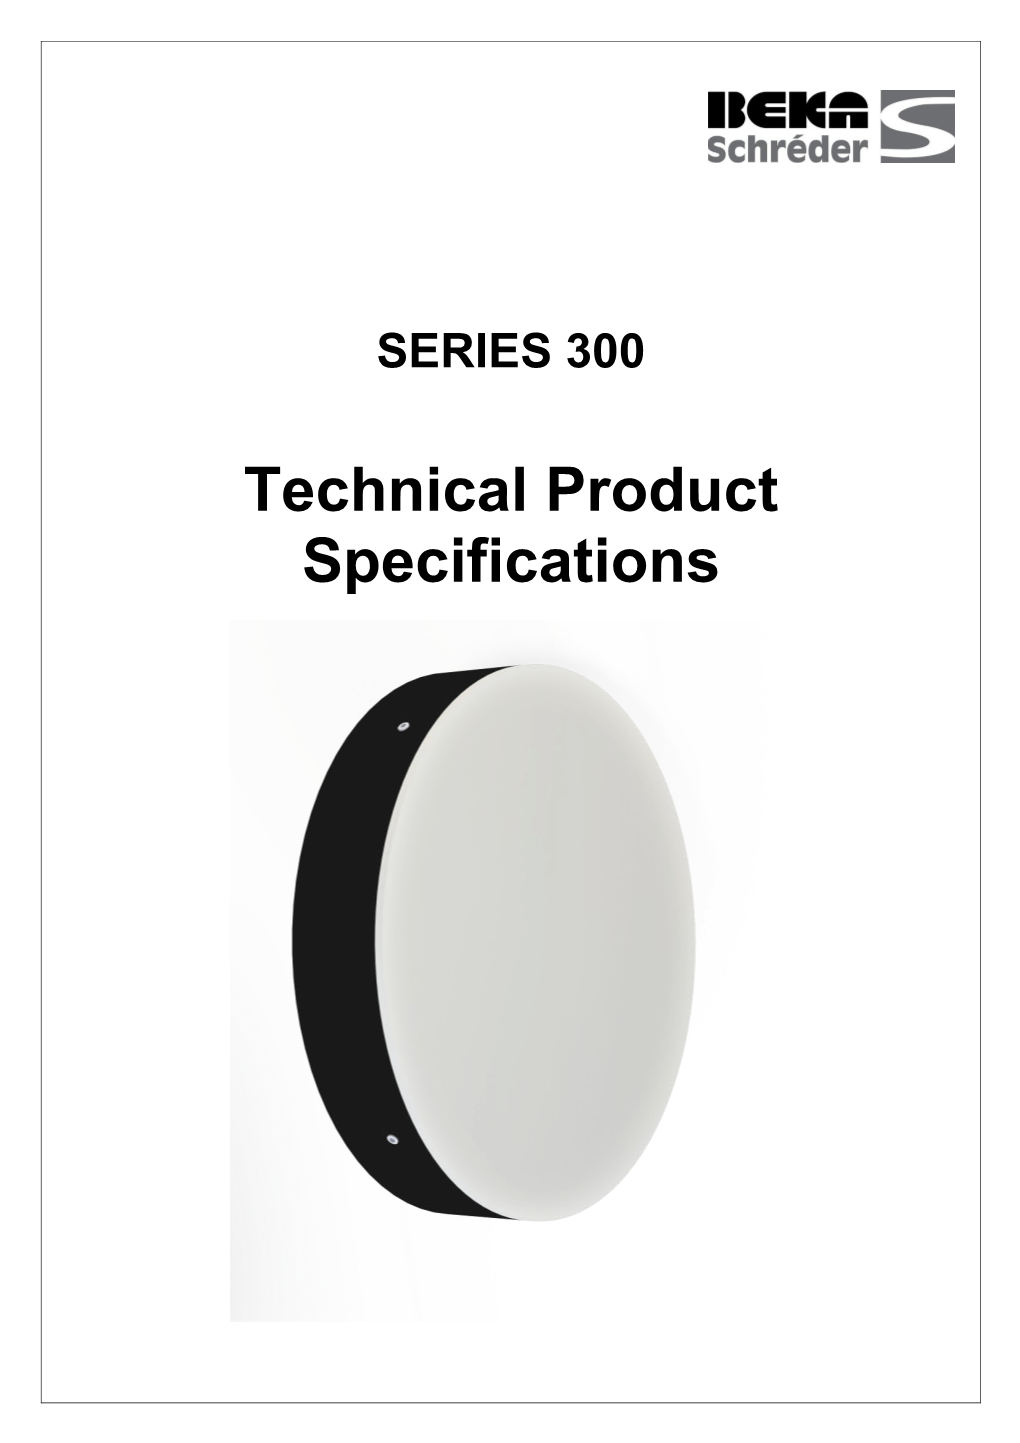 Technical Product Specifications - Template s3